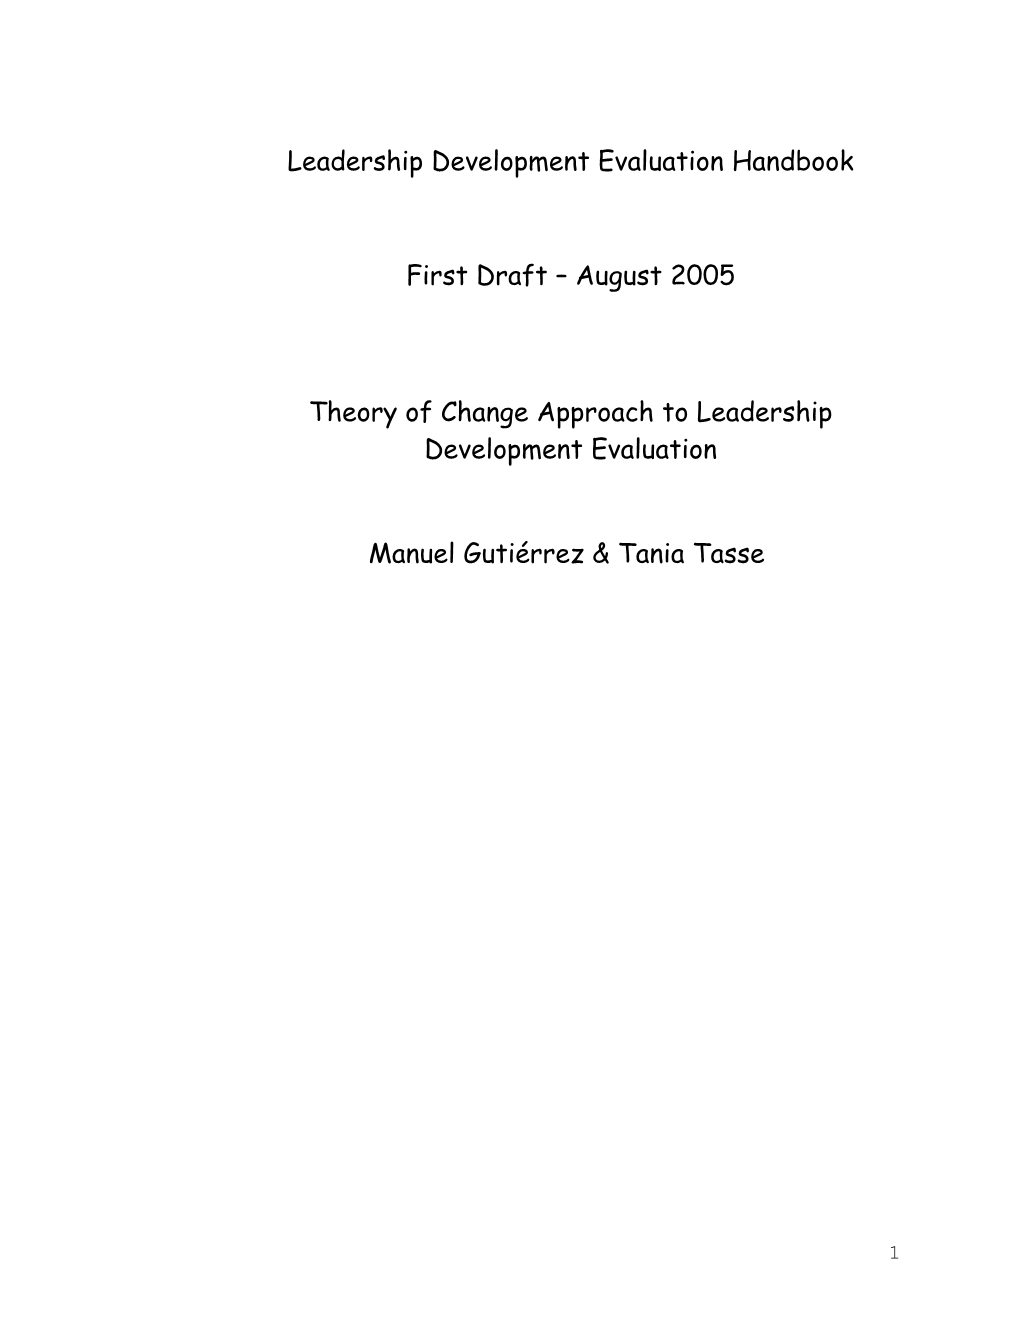 Theory Of Change Approaches To Leadership Development Evaluation